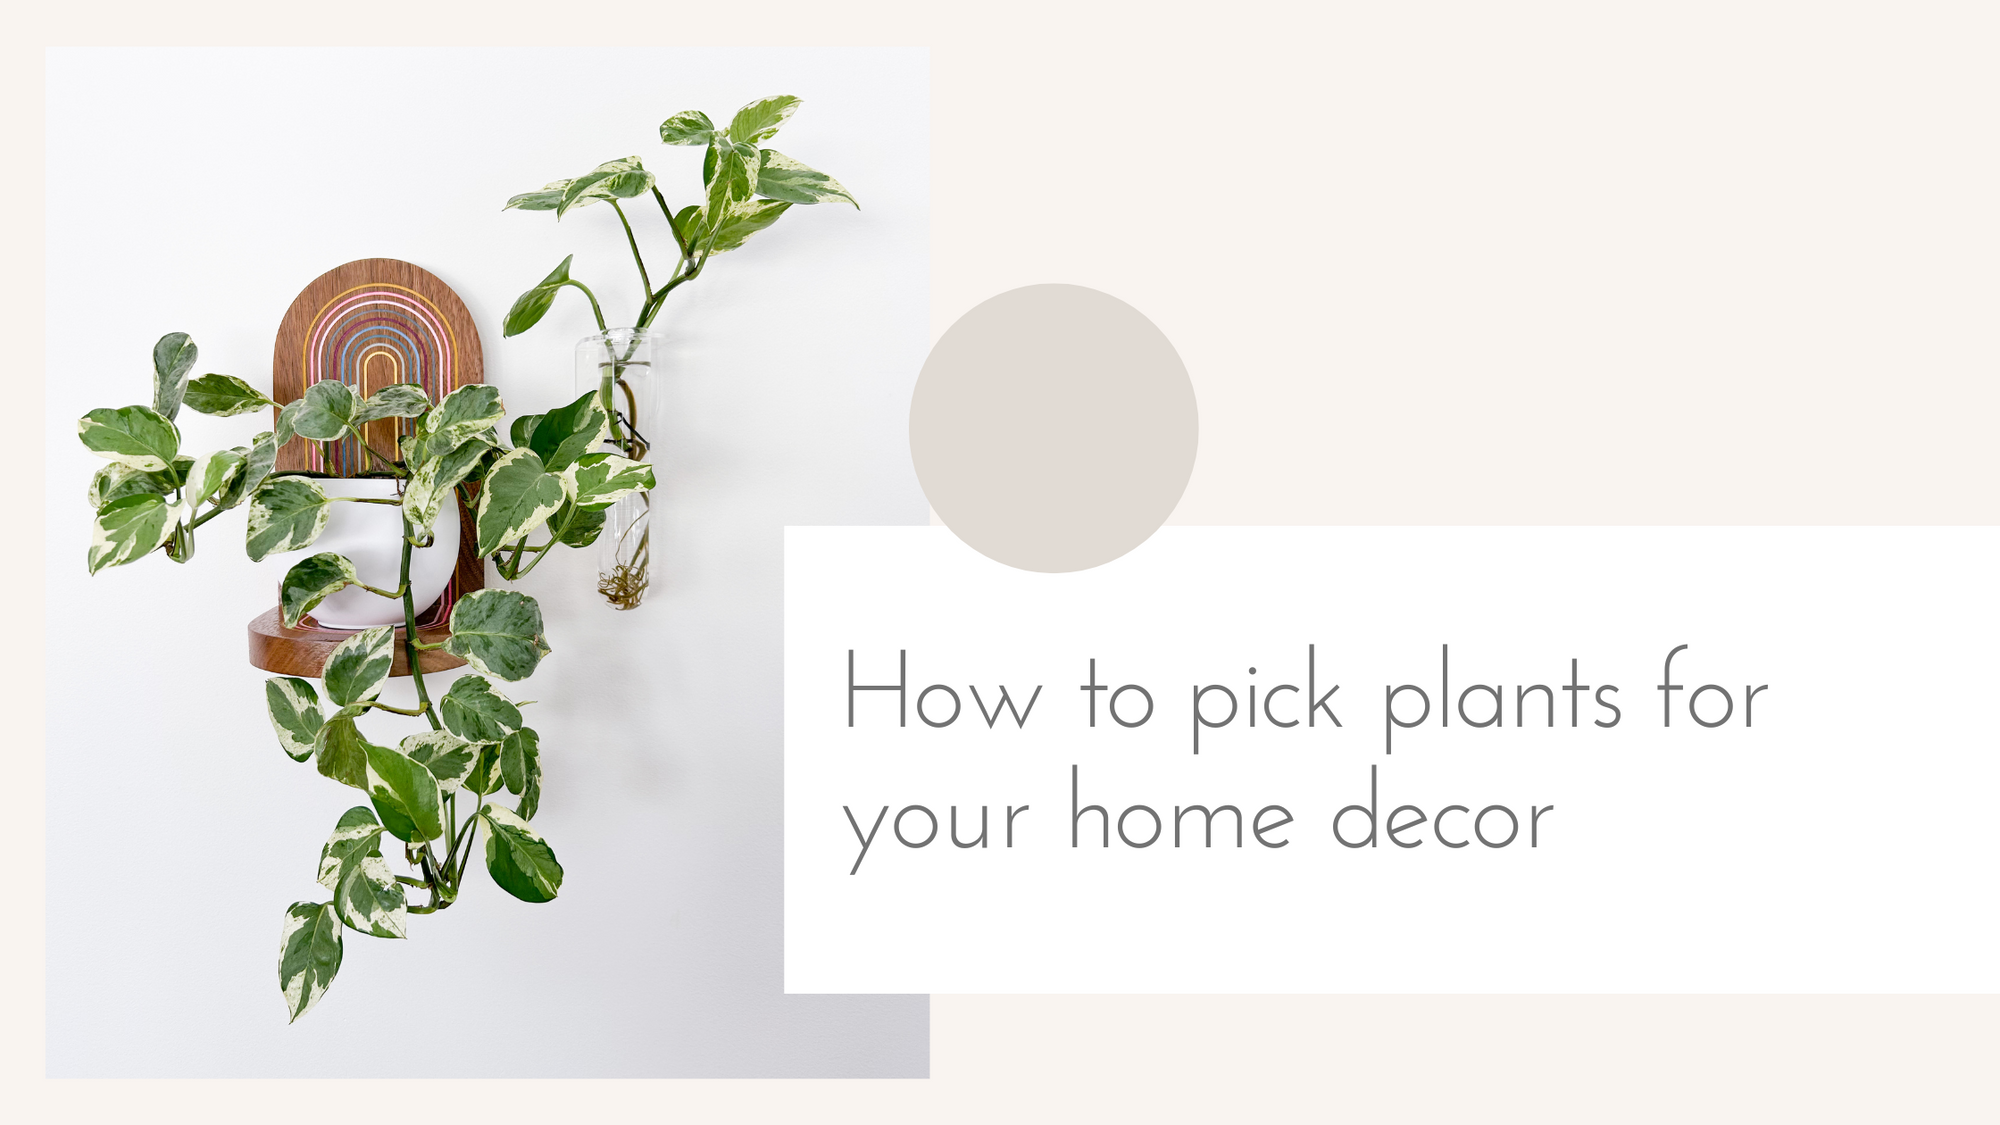 How to pick plants for your home decor